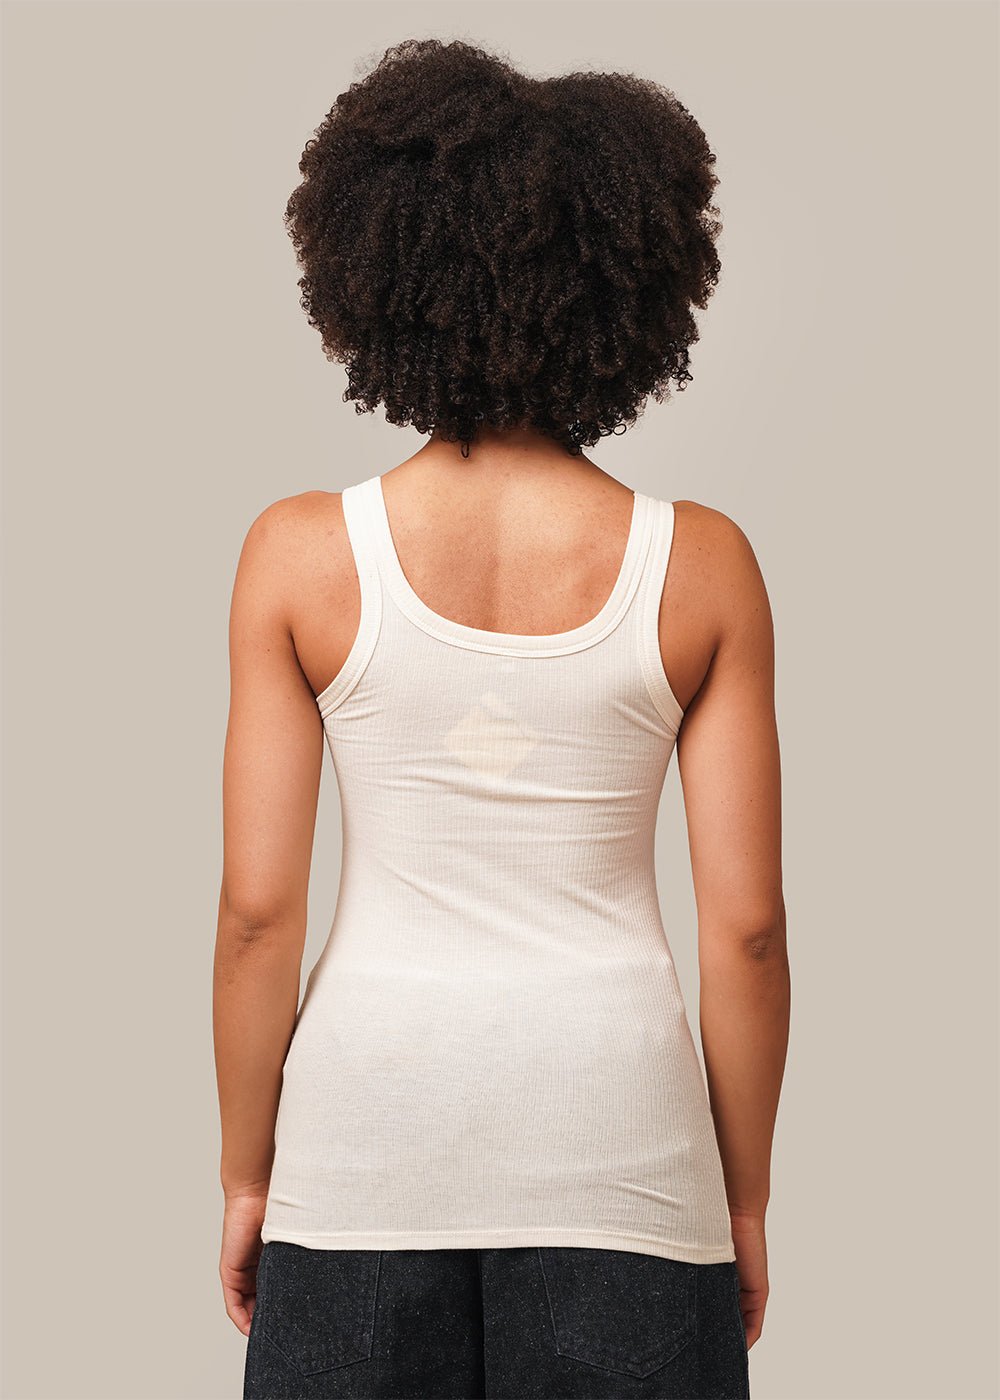 Heart Tank in Undyed Off-White by BASERANGE – New Classics Studios